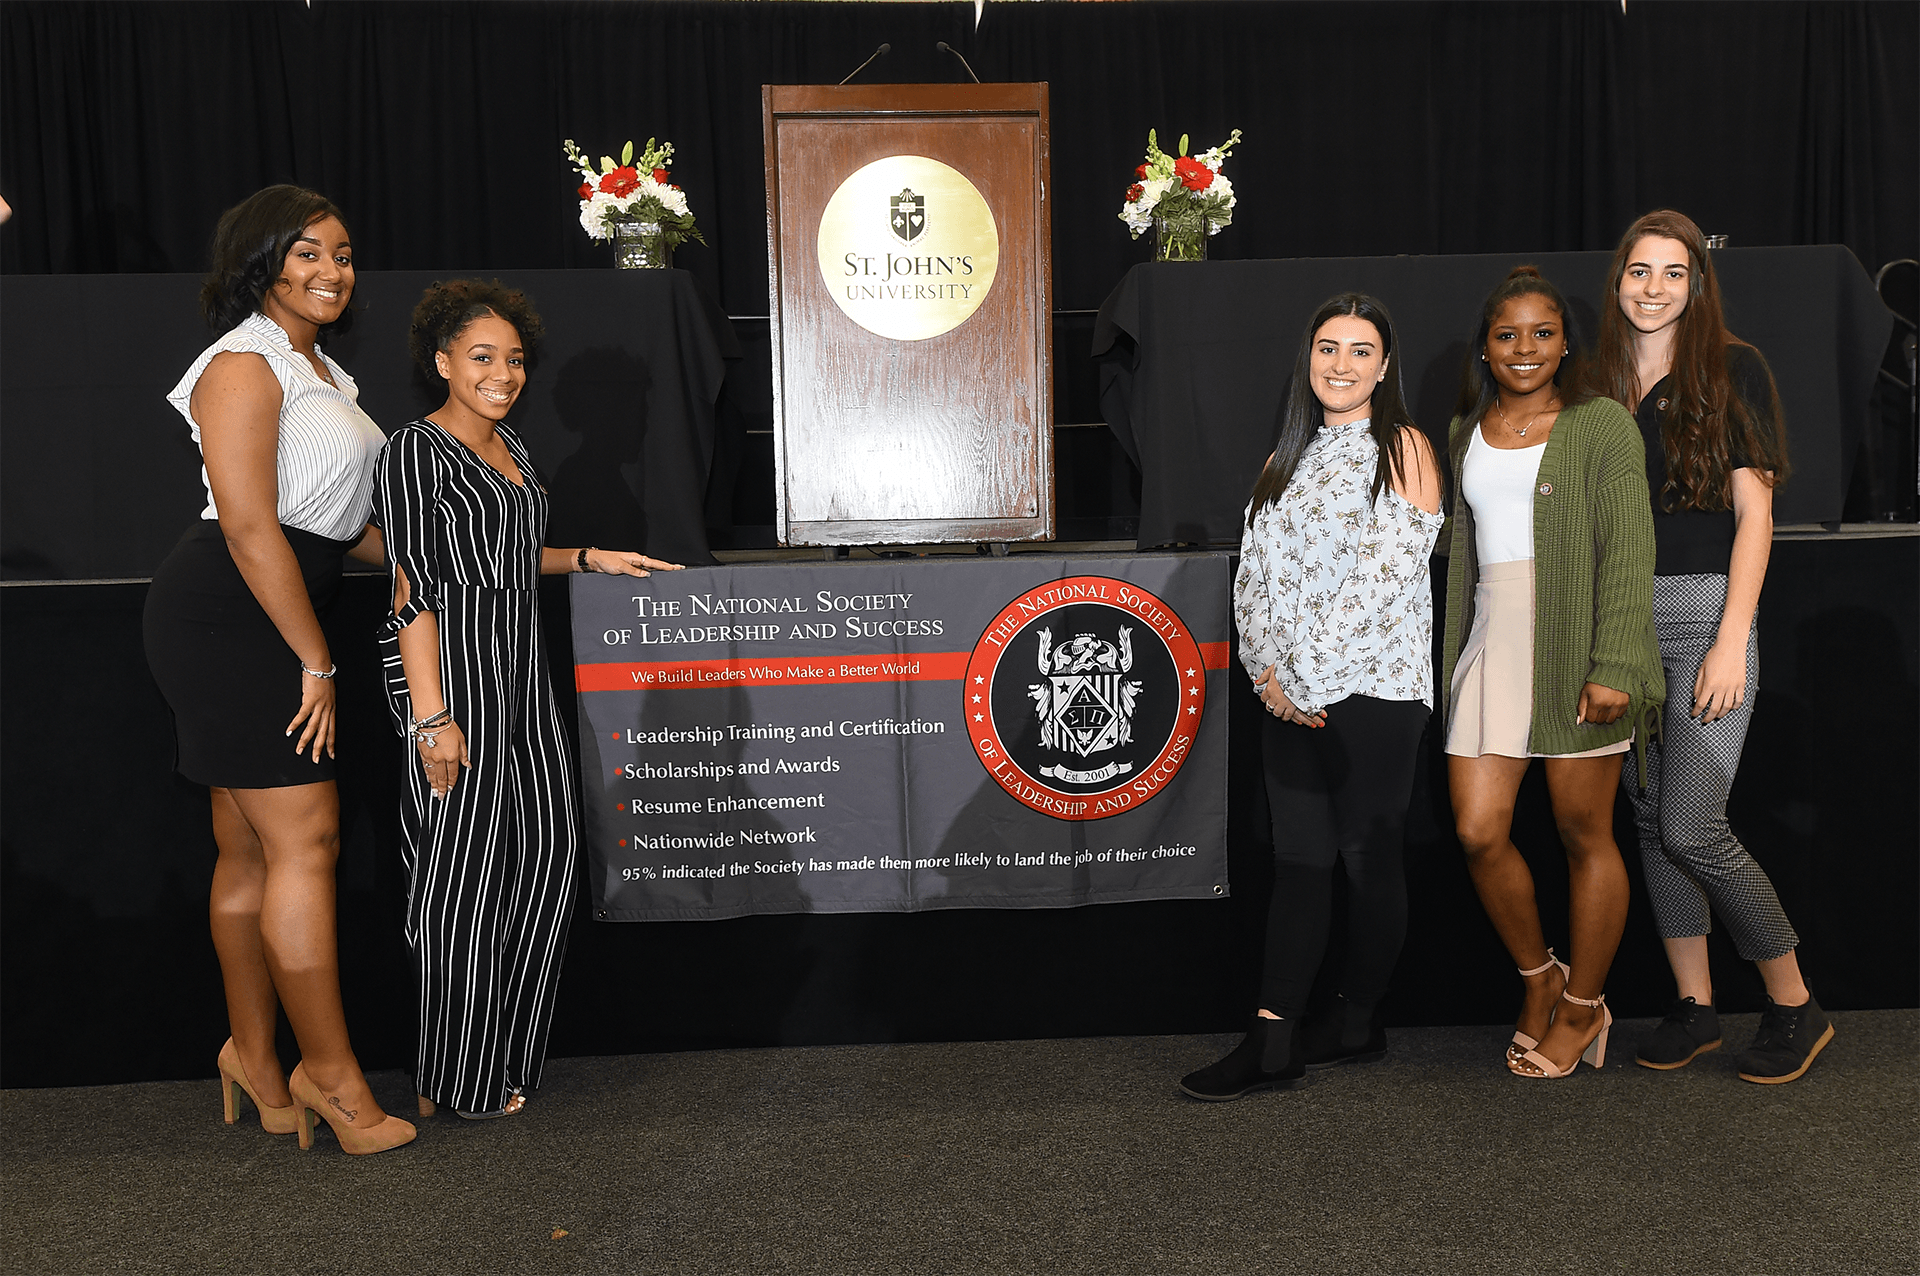 NSLS students posing in front of a banner